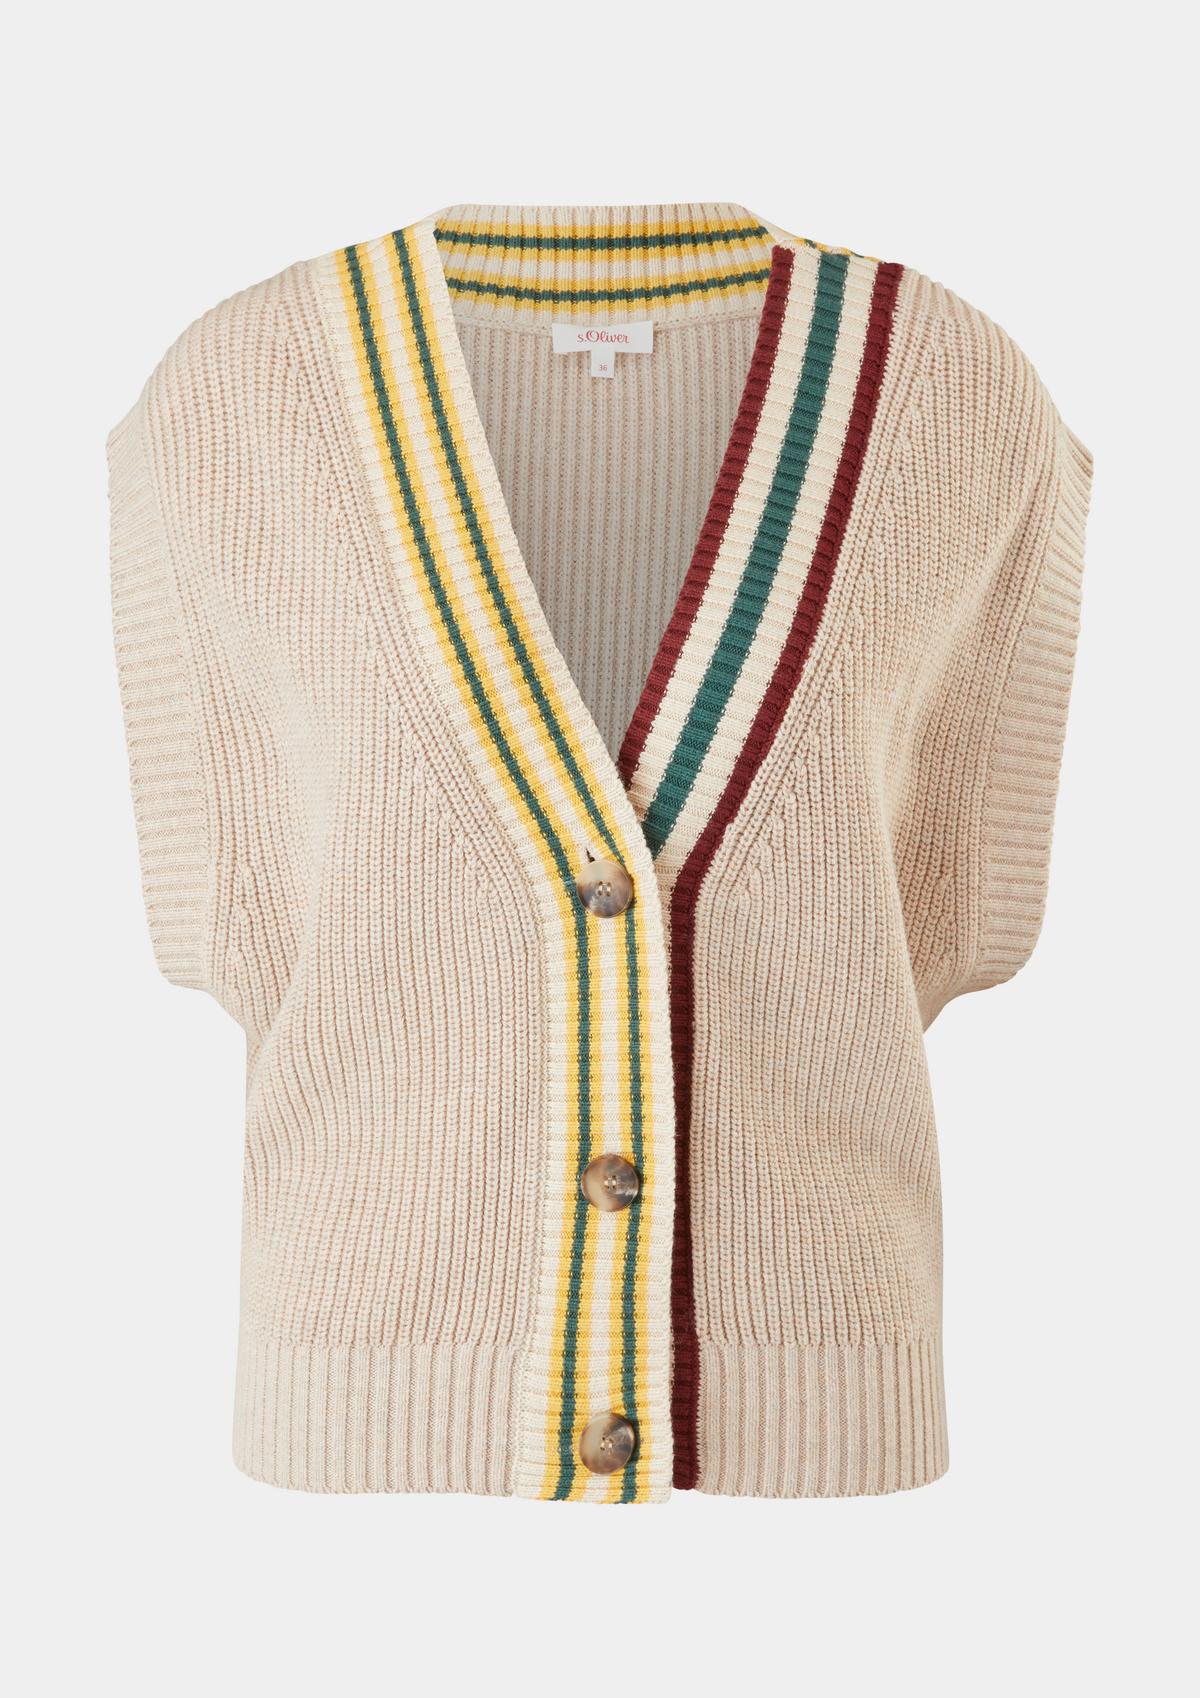 s.Oliver Knitted body warmer with stripes